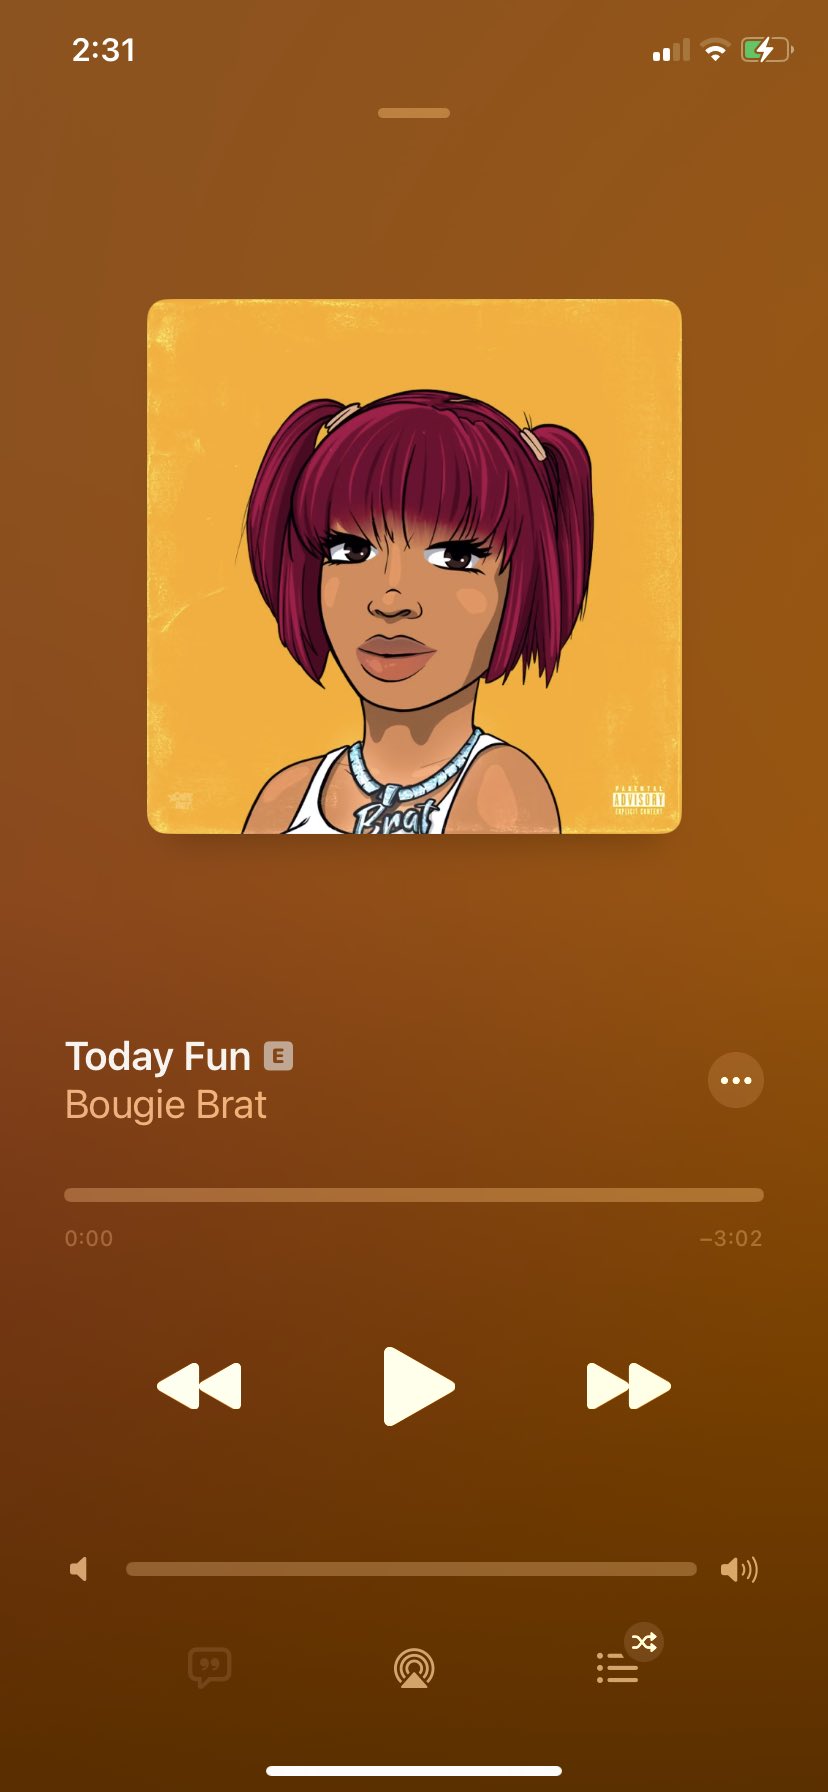 Bougie Brat on Twitter: "&amp; ITS OUT ON APPLE MUSIC🦖🧡  https://t.co/qQNQJHQlfq" / Twitter